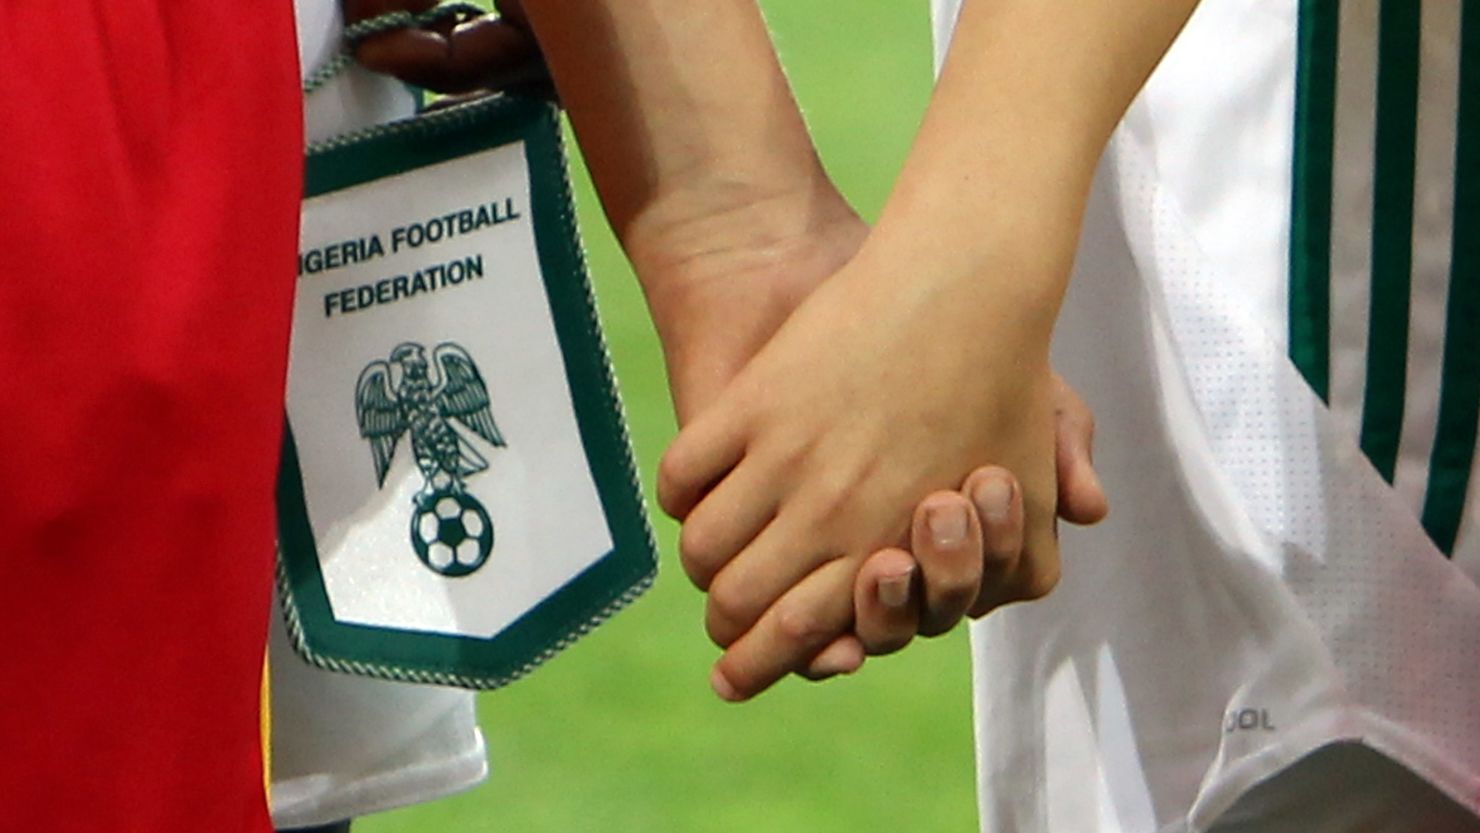 Lesbian players could be banned from the Nigeria national team according to reports from the West Africa country.